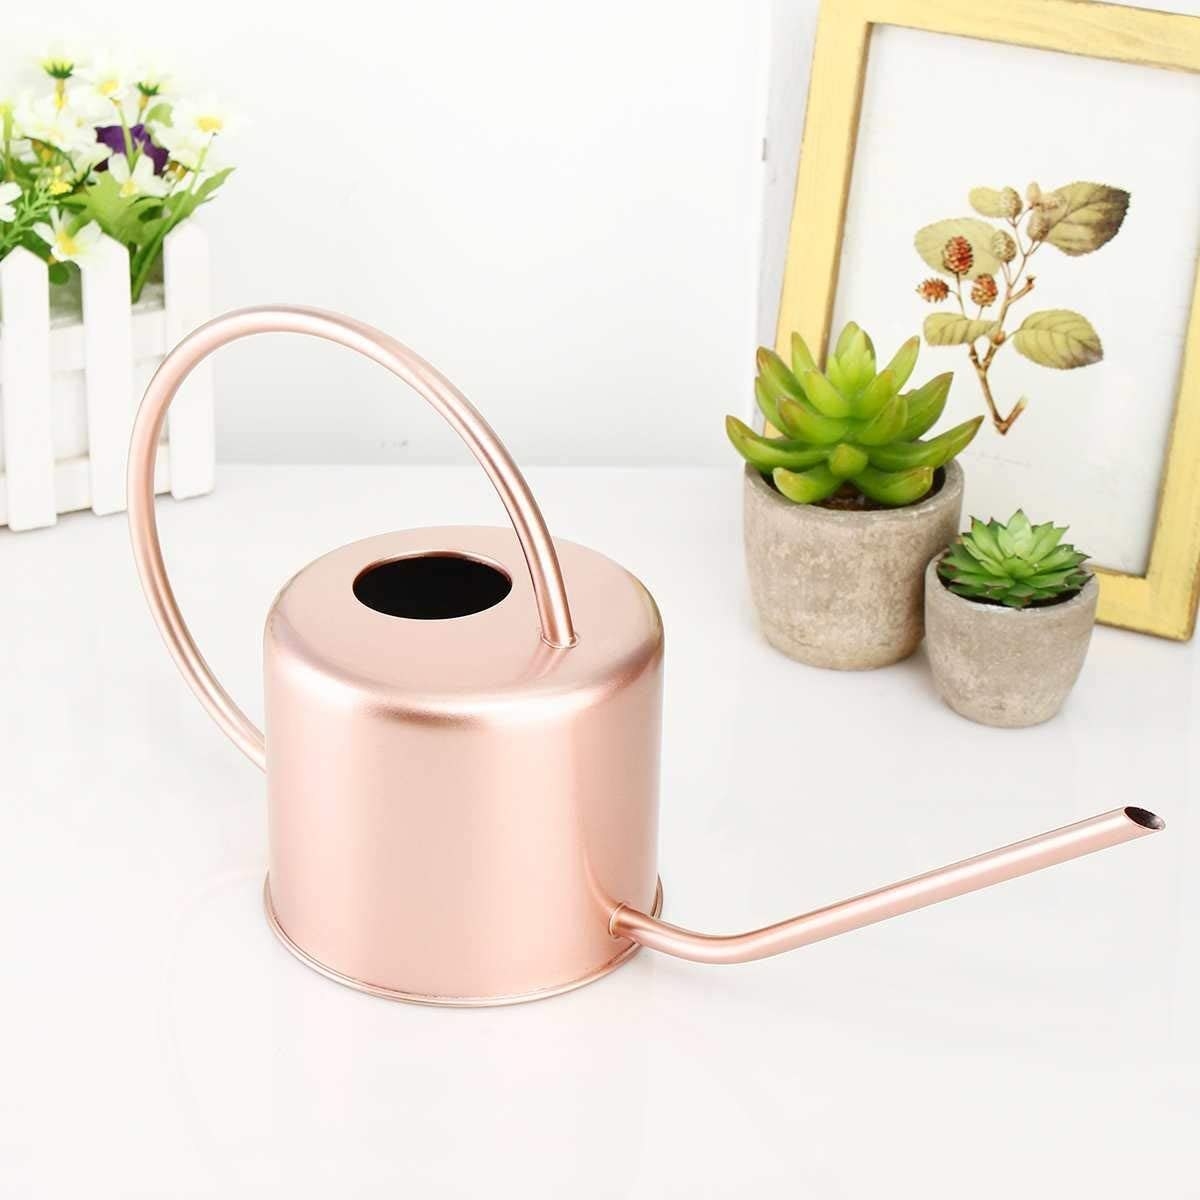 A metallic watering can with an extra long spout